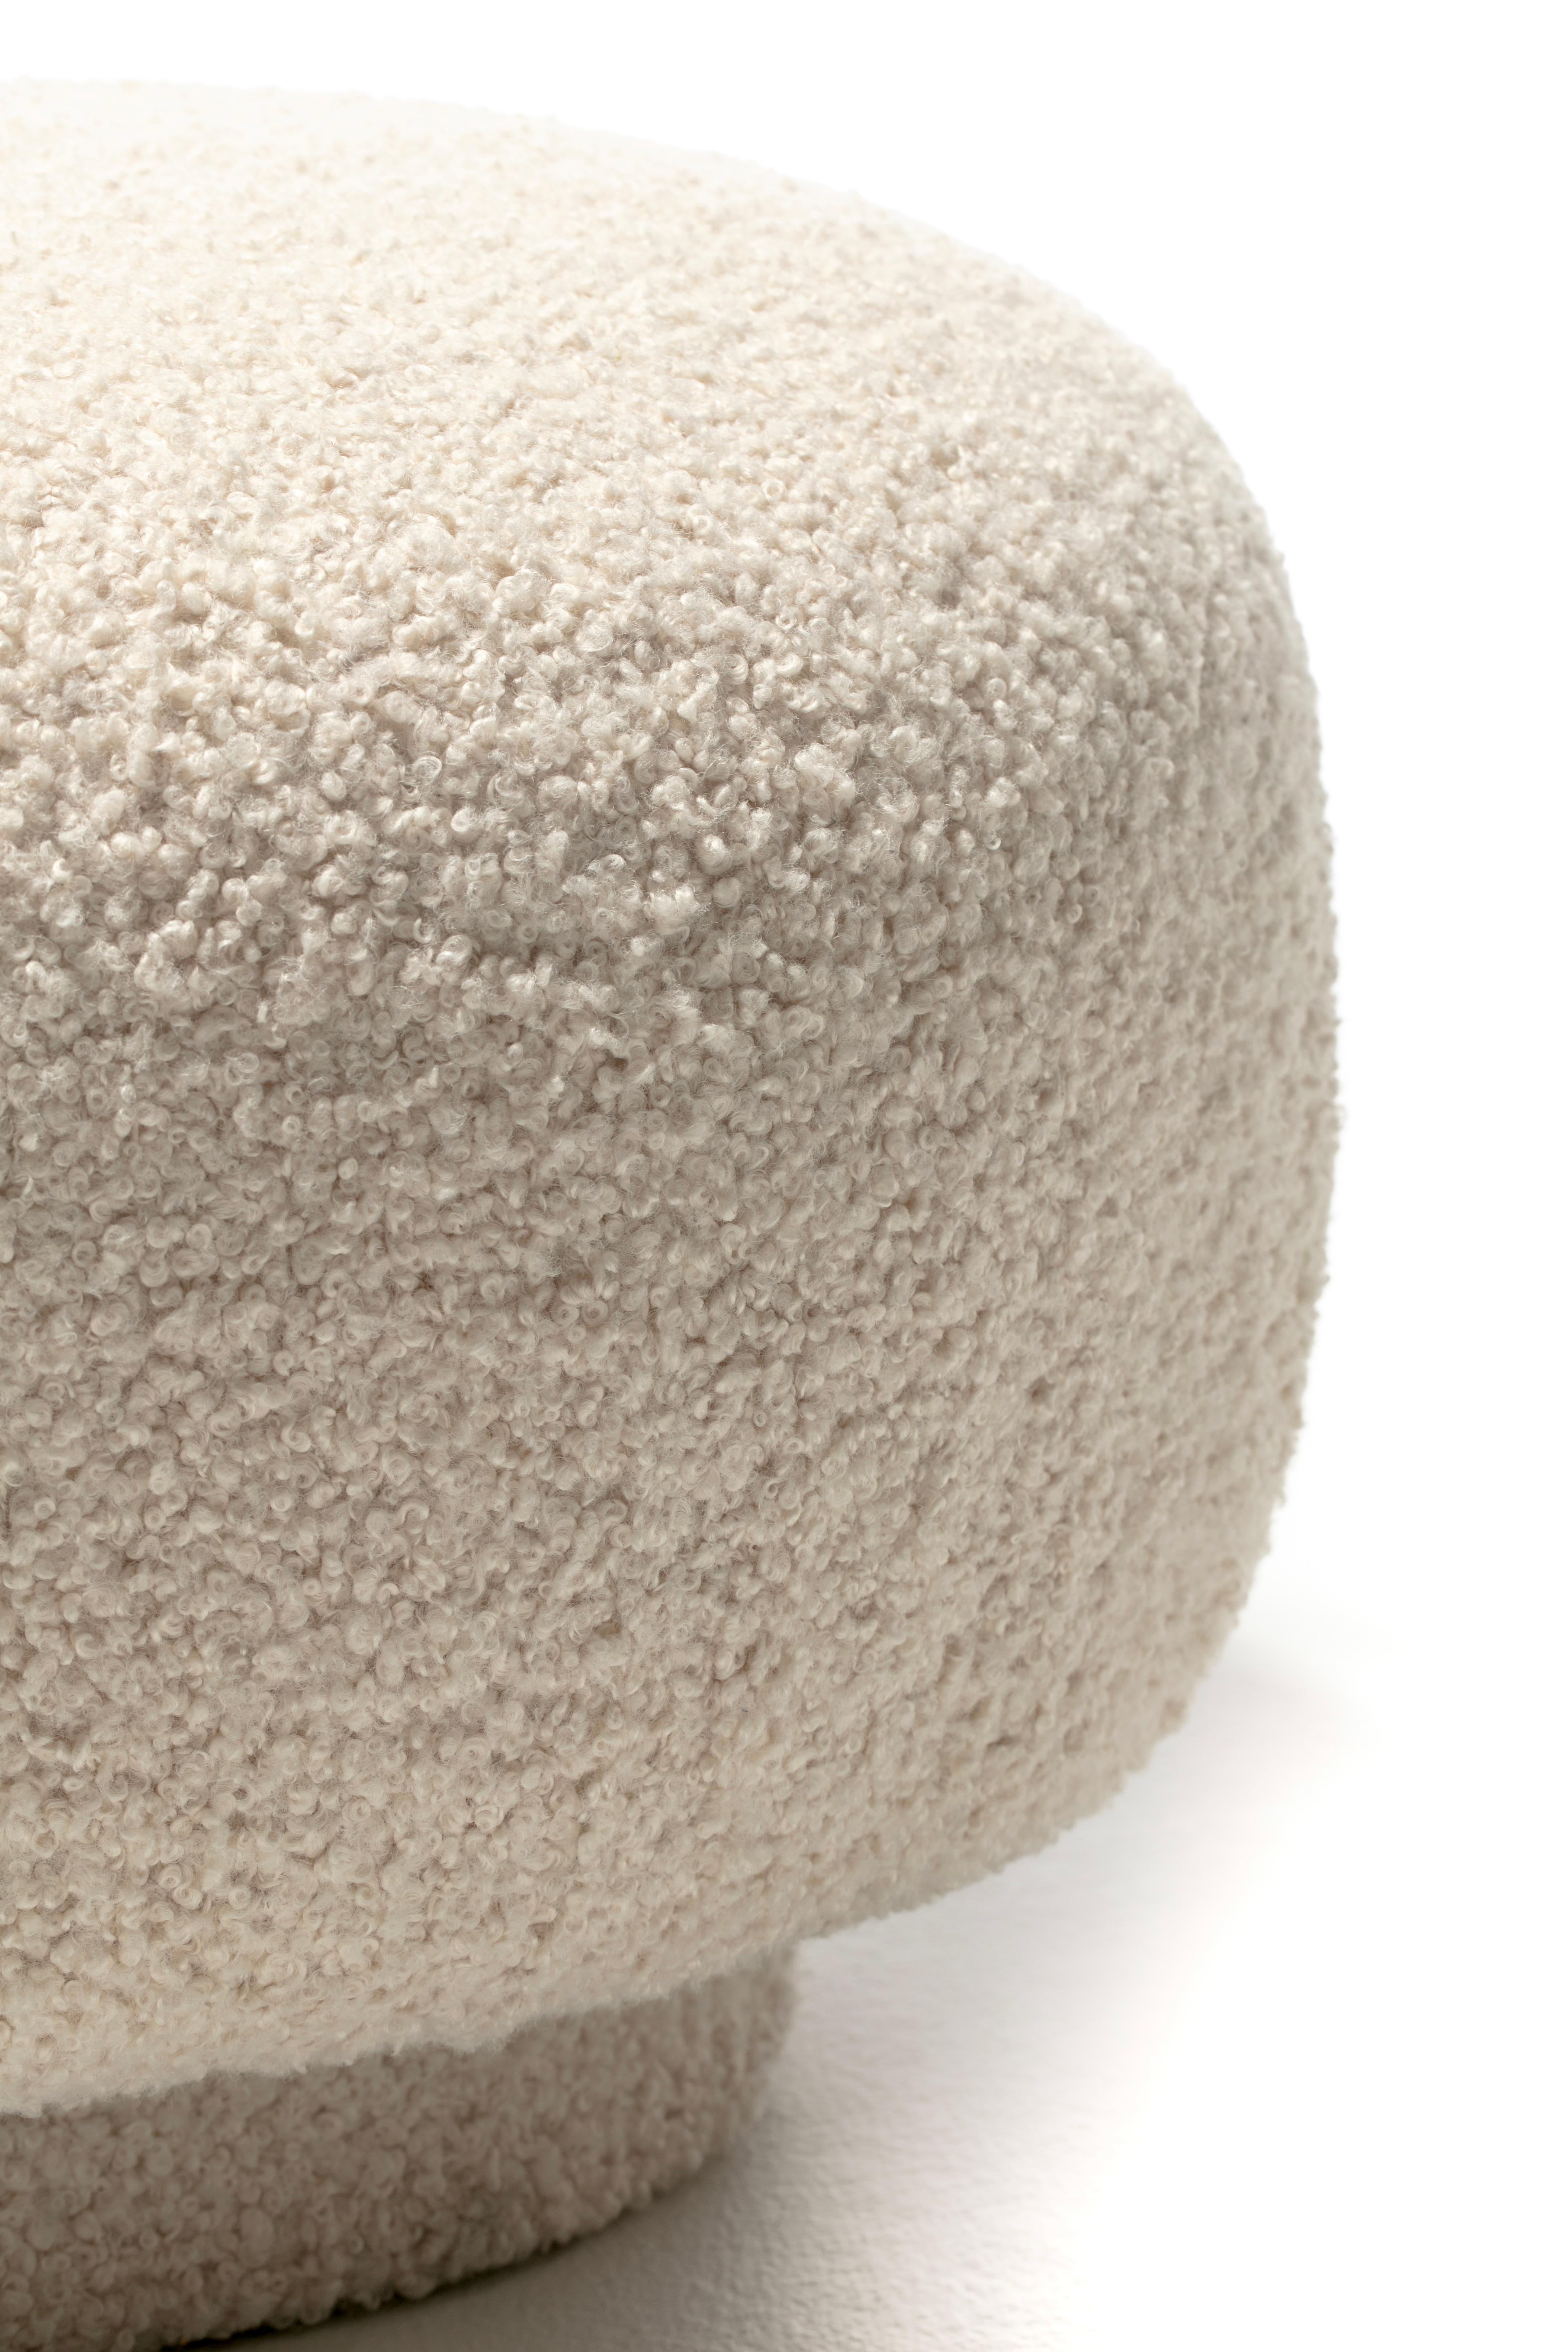 Upholstery Mushroom Swivel Top Post Modern Style Ottoman Pouf in Ivory White Bouclé For Sale